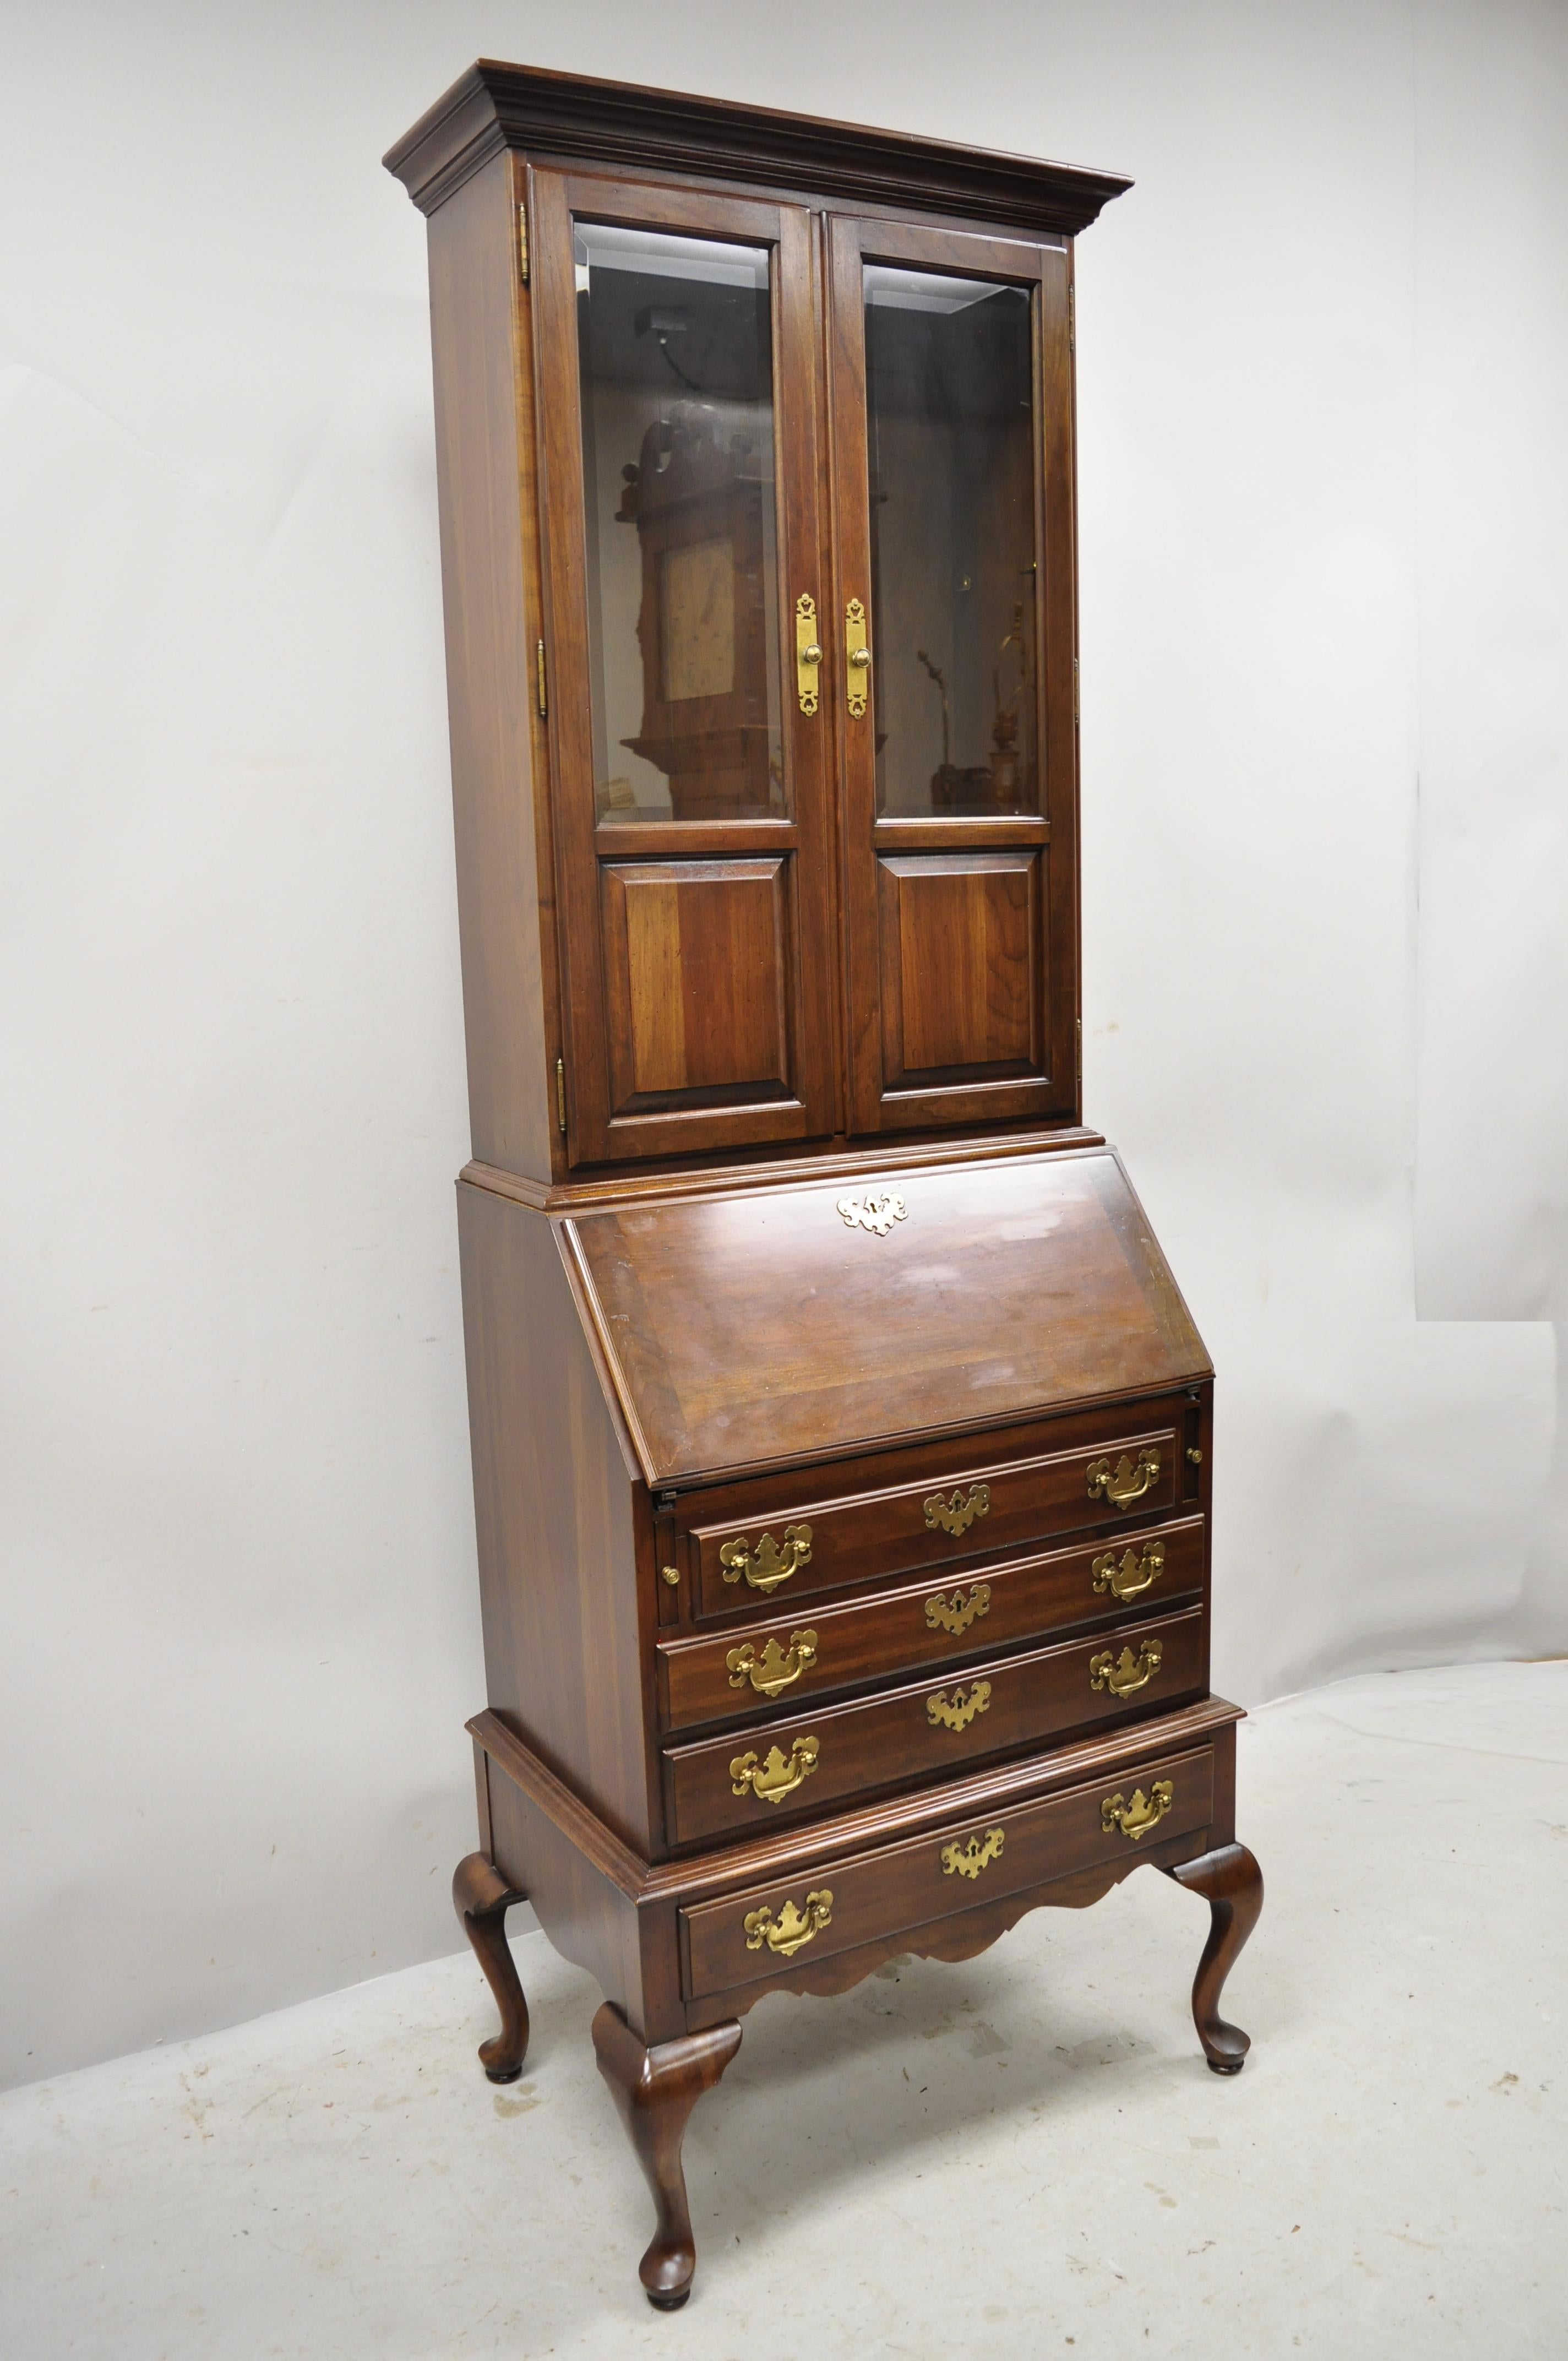 Ethan Allen Queen Anne cherrywood drop front secretary desk with curio top. Item features solid wood construction, beautiful wood grain, 2-part construction, 2 glass swing doors, original stamp, 4 dovetailed drawers, 2 adjustable shelves, shapely